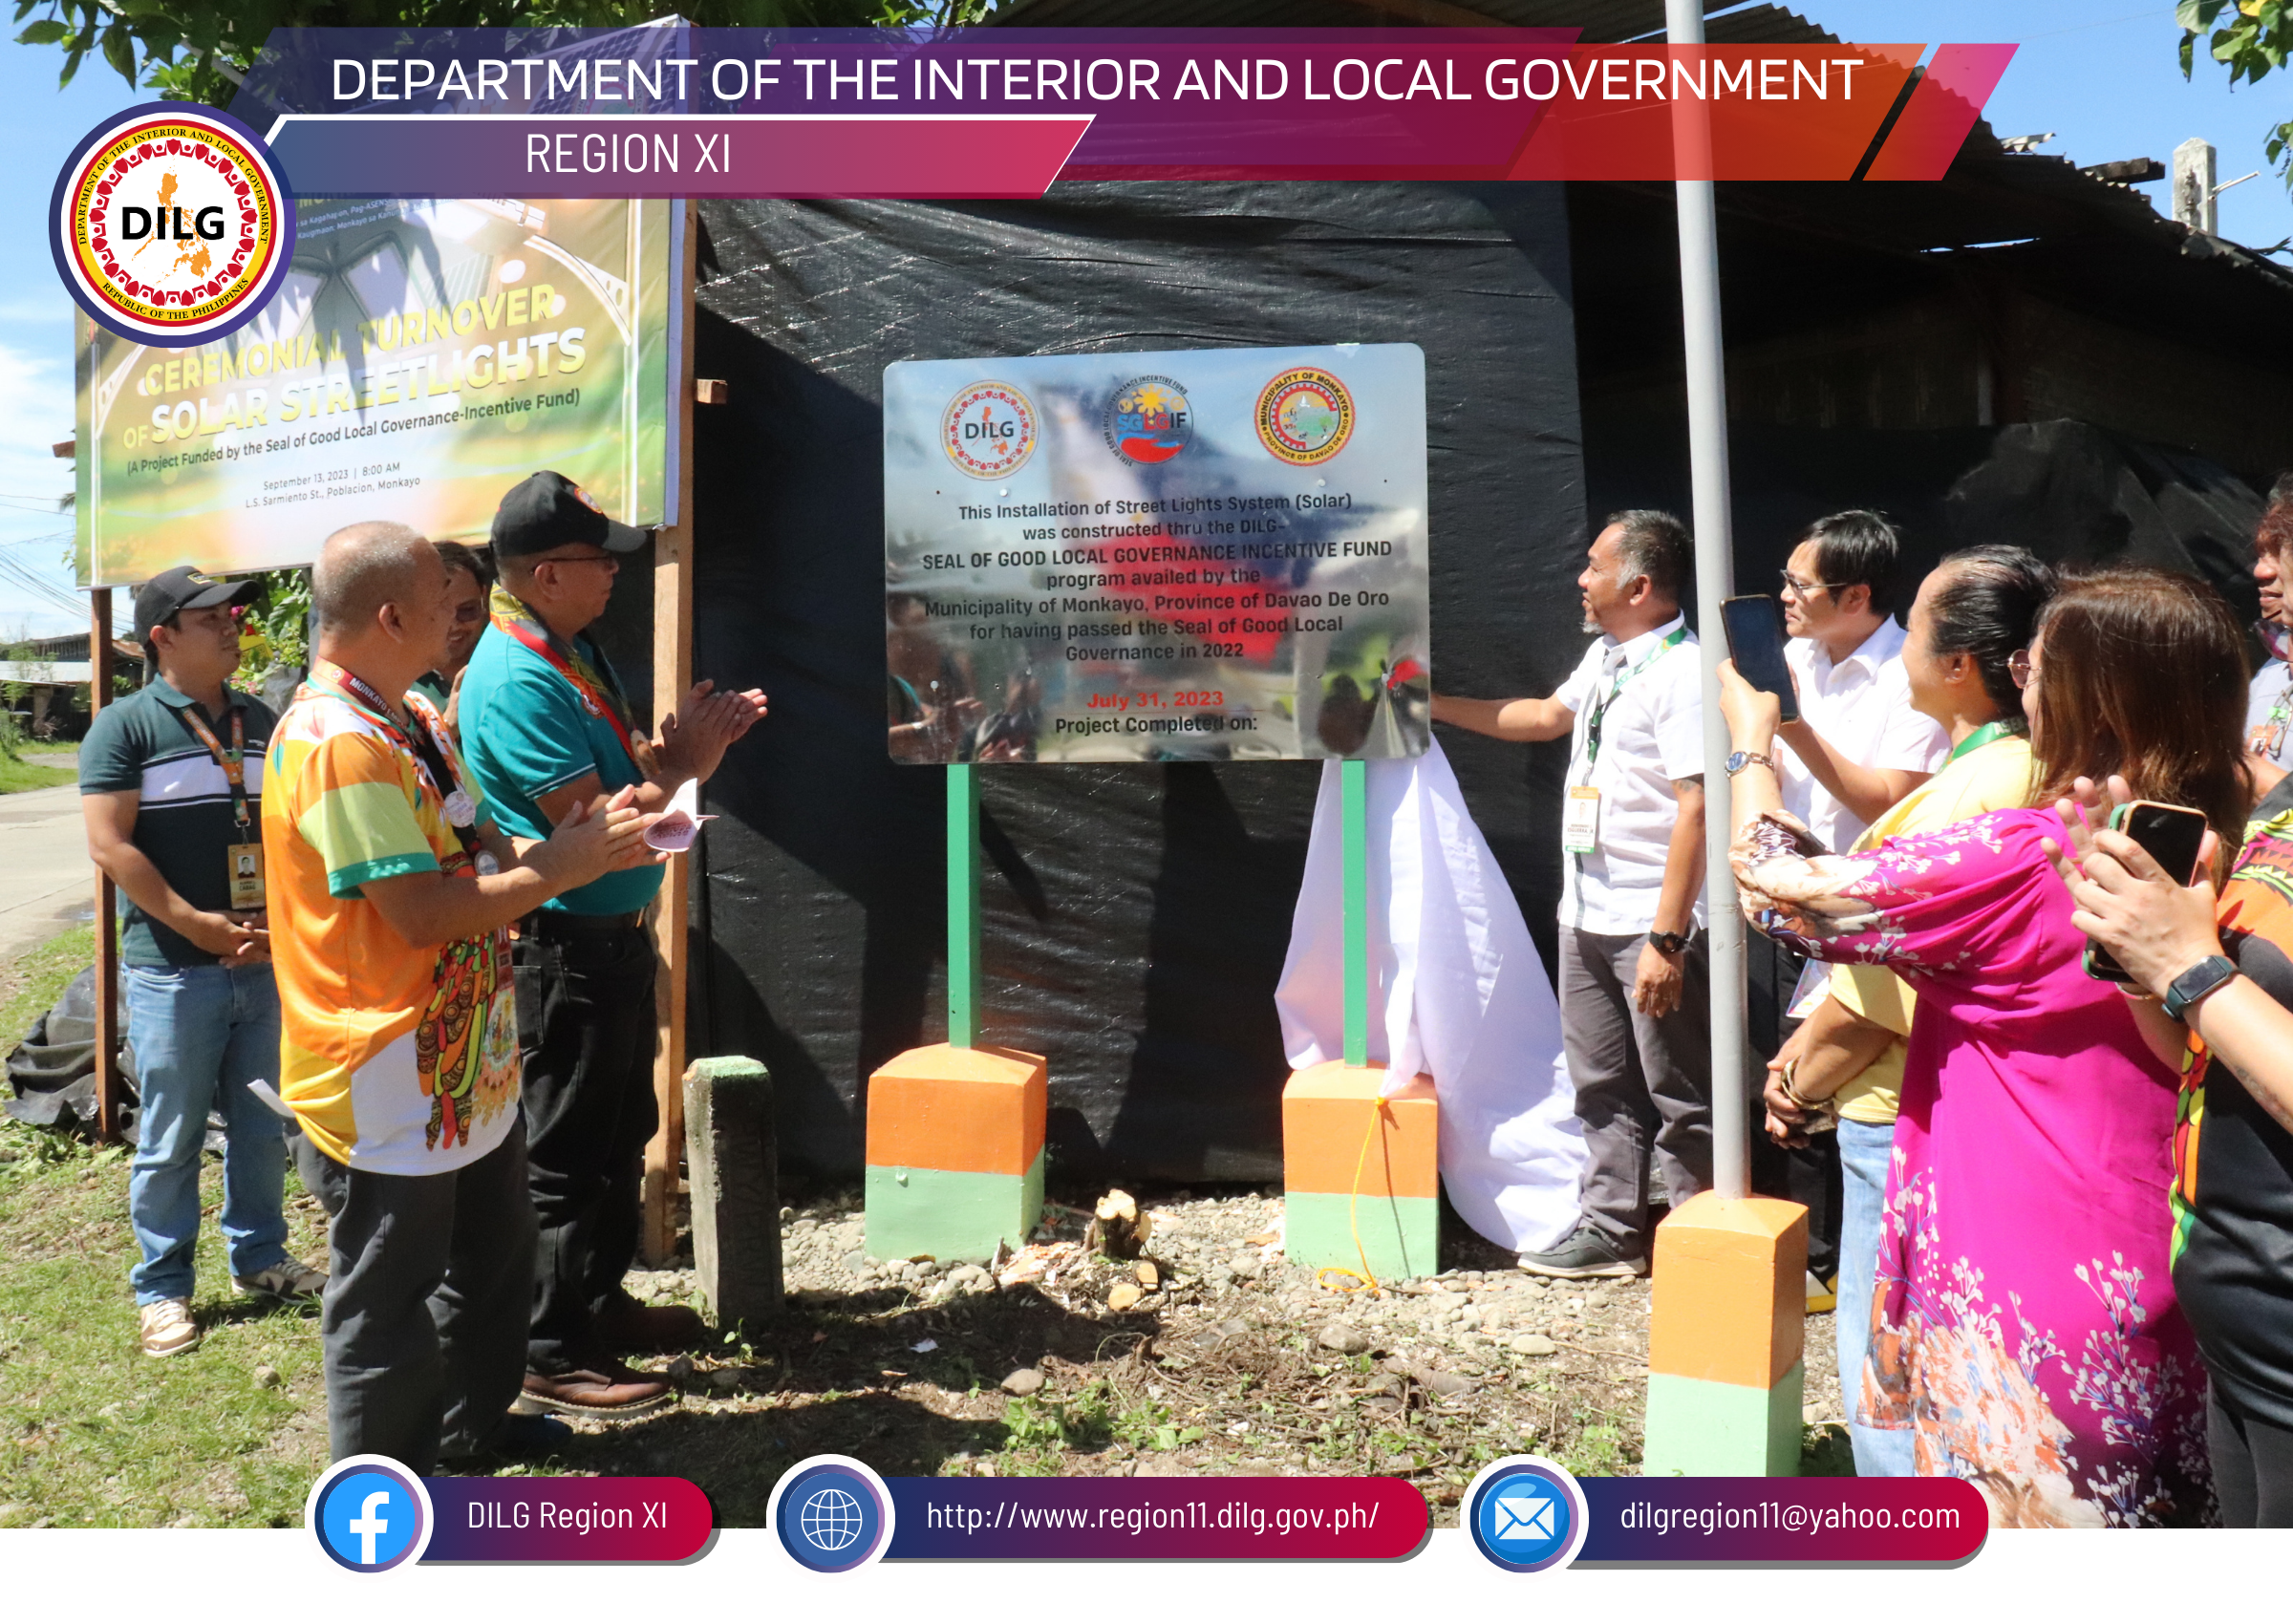 Ceremonial Turn-Over of the SGLG-IF Project of Solar Street Lights in Monkayo, Davao de Oro